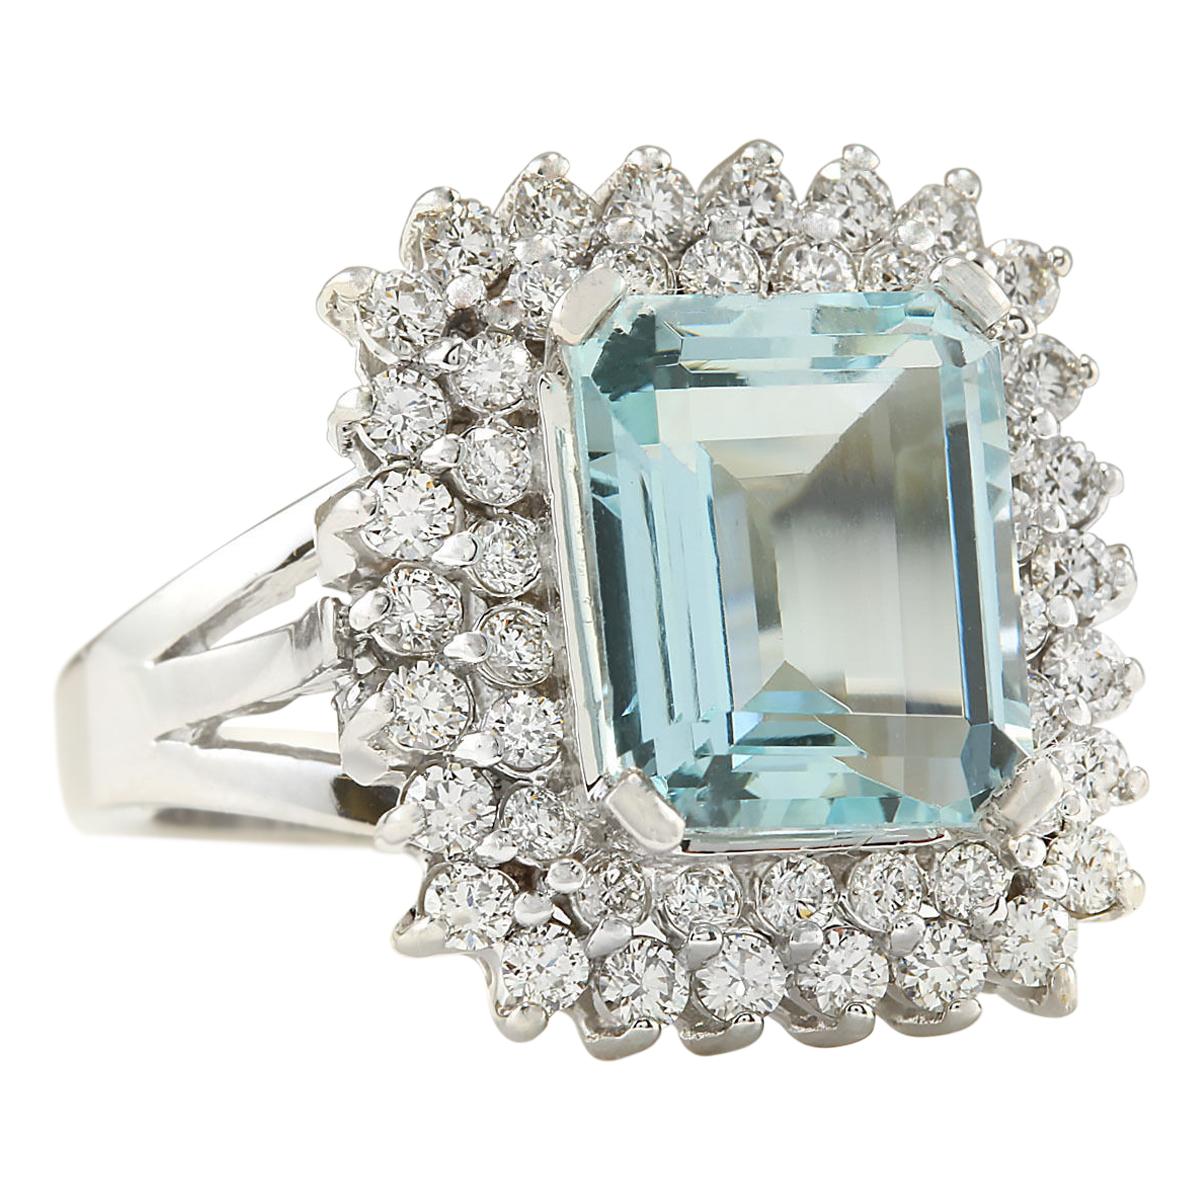 Stamped: 18K White Gold
Total Ring Weight: 9.3 Grams
Ring Length: N/A
Ring Width: N/A
Gemstone Weight: Total Natural Aquamarine Weight is 4.47 Carat (Measures: 11.52x9.18 mm)
Color: Blue
Diamond Weight: Total Natural Diamond Weight is 1.05